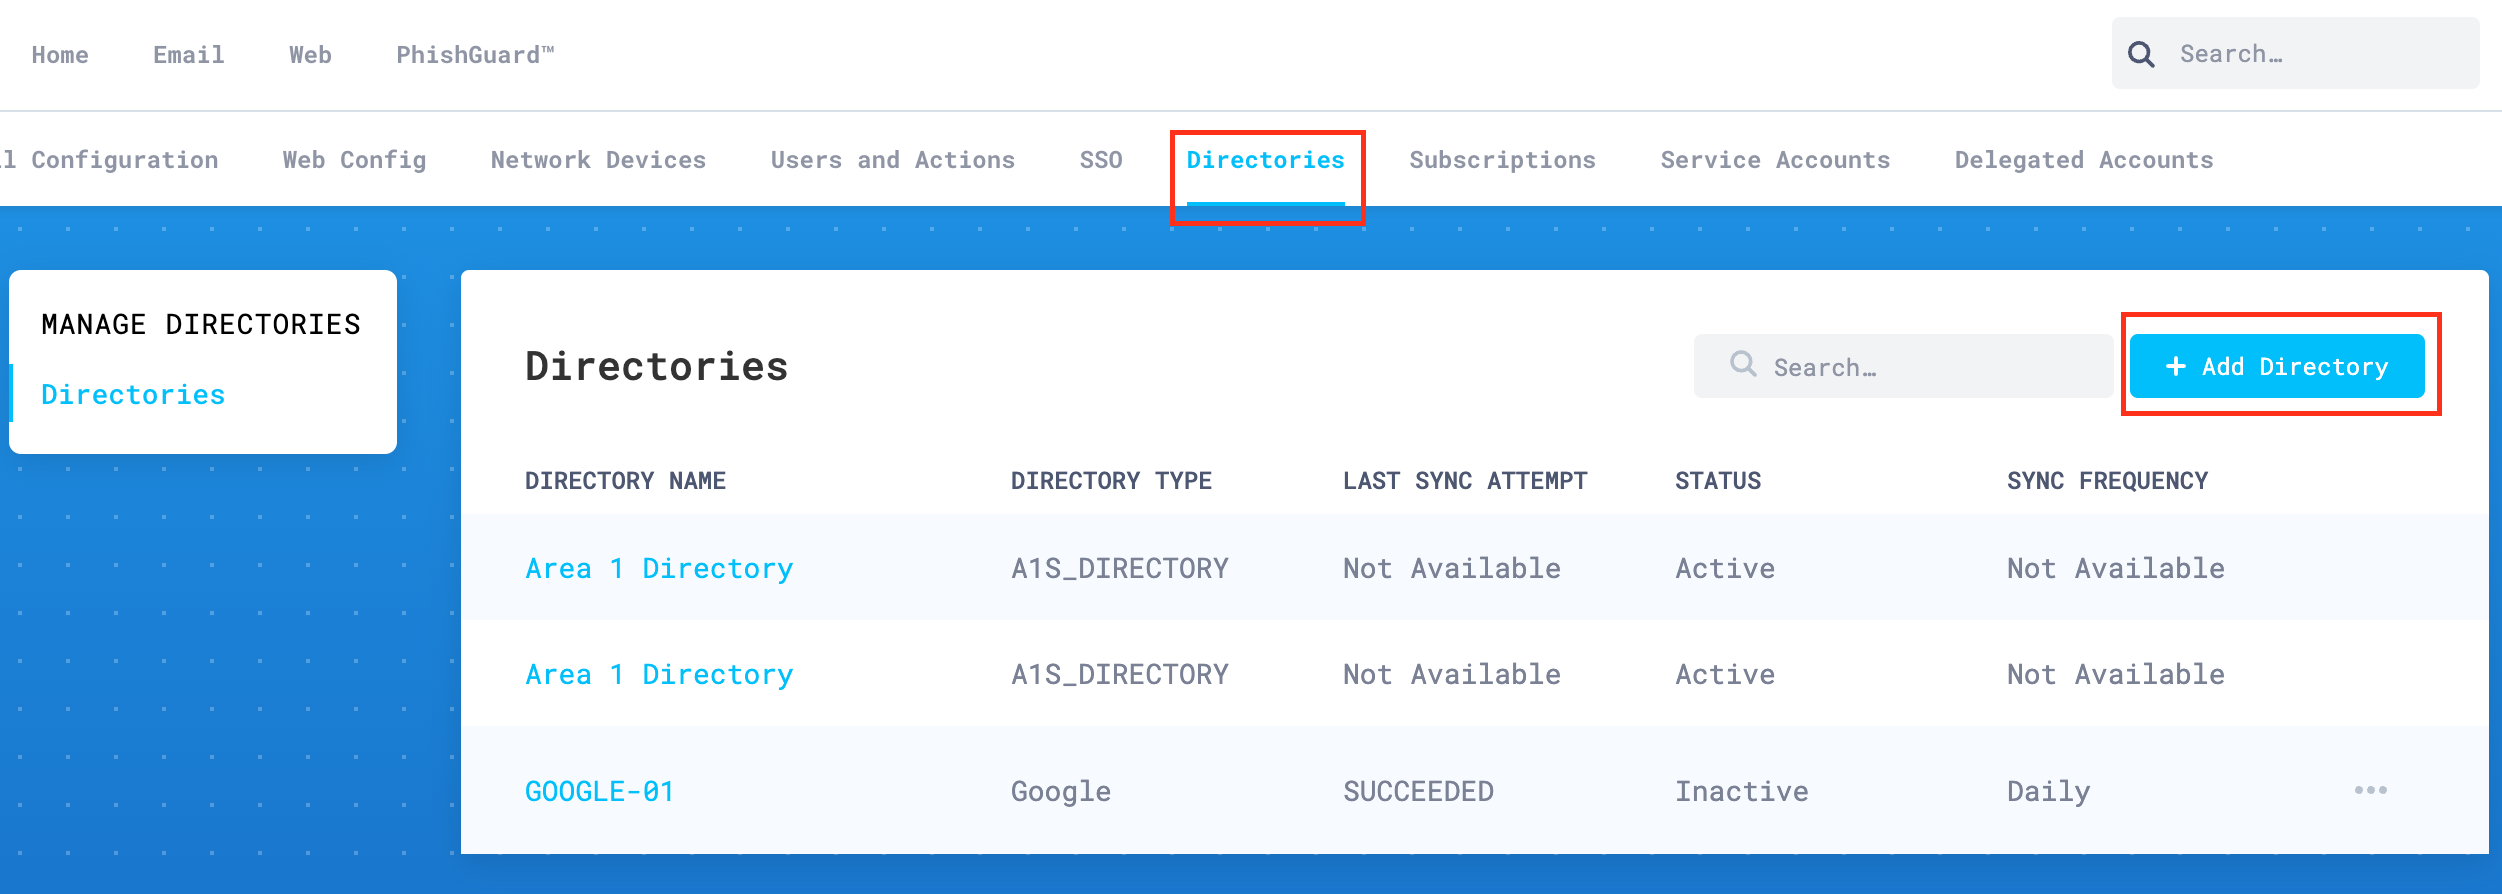 Go to Directories in the dashboard of Area 1, and then select Add Directory to start the authorization process